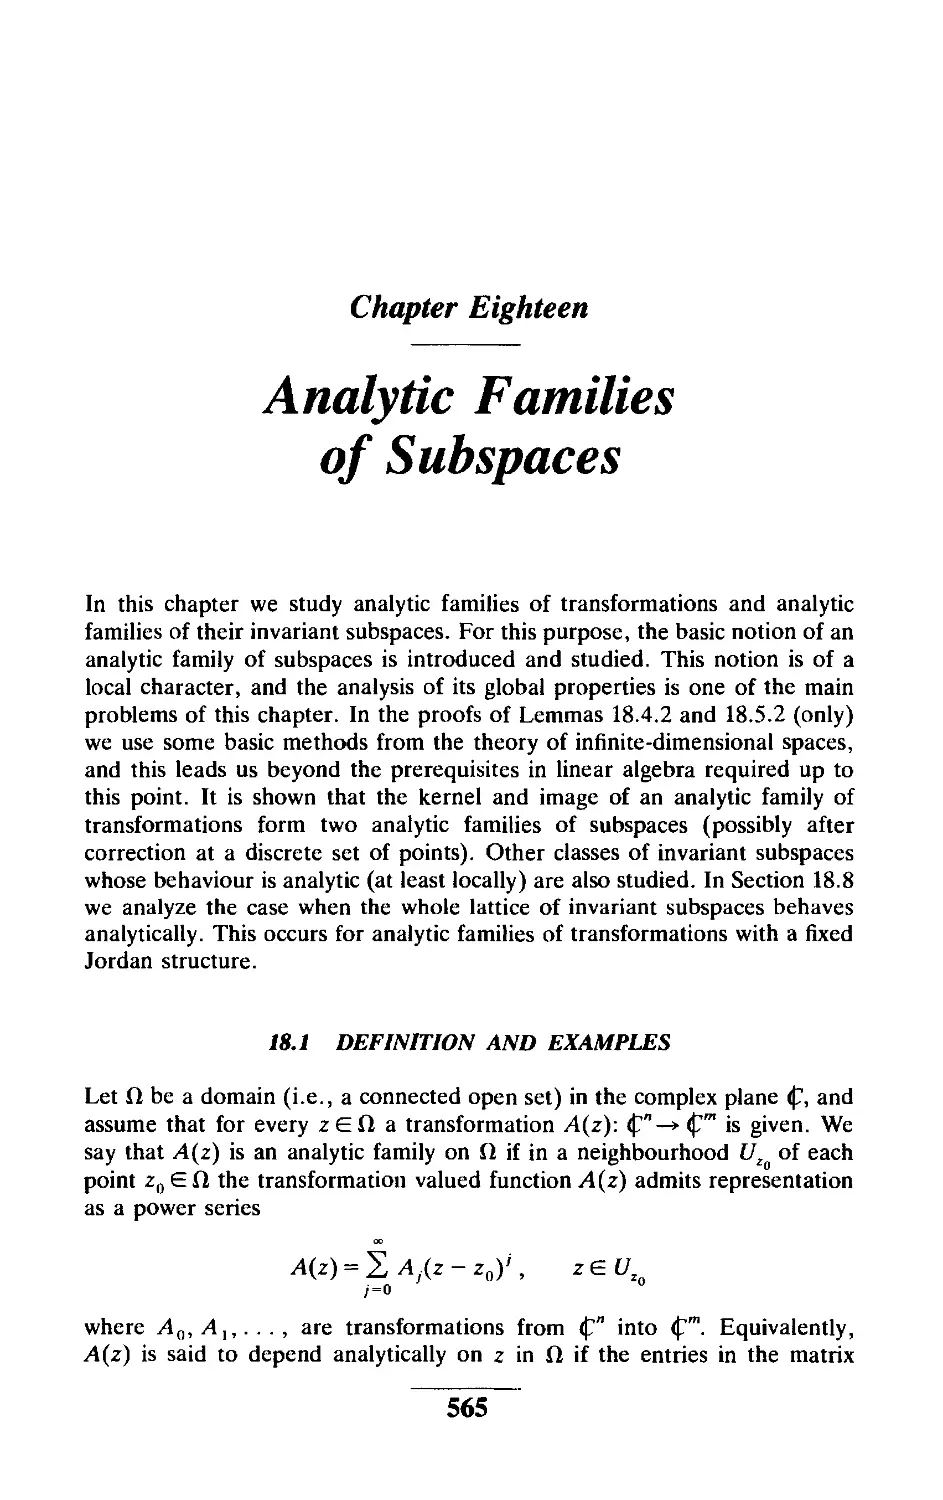 Chapter Eighteen Analytic Families of Subspaces